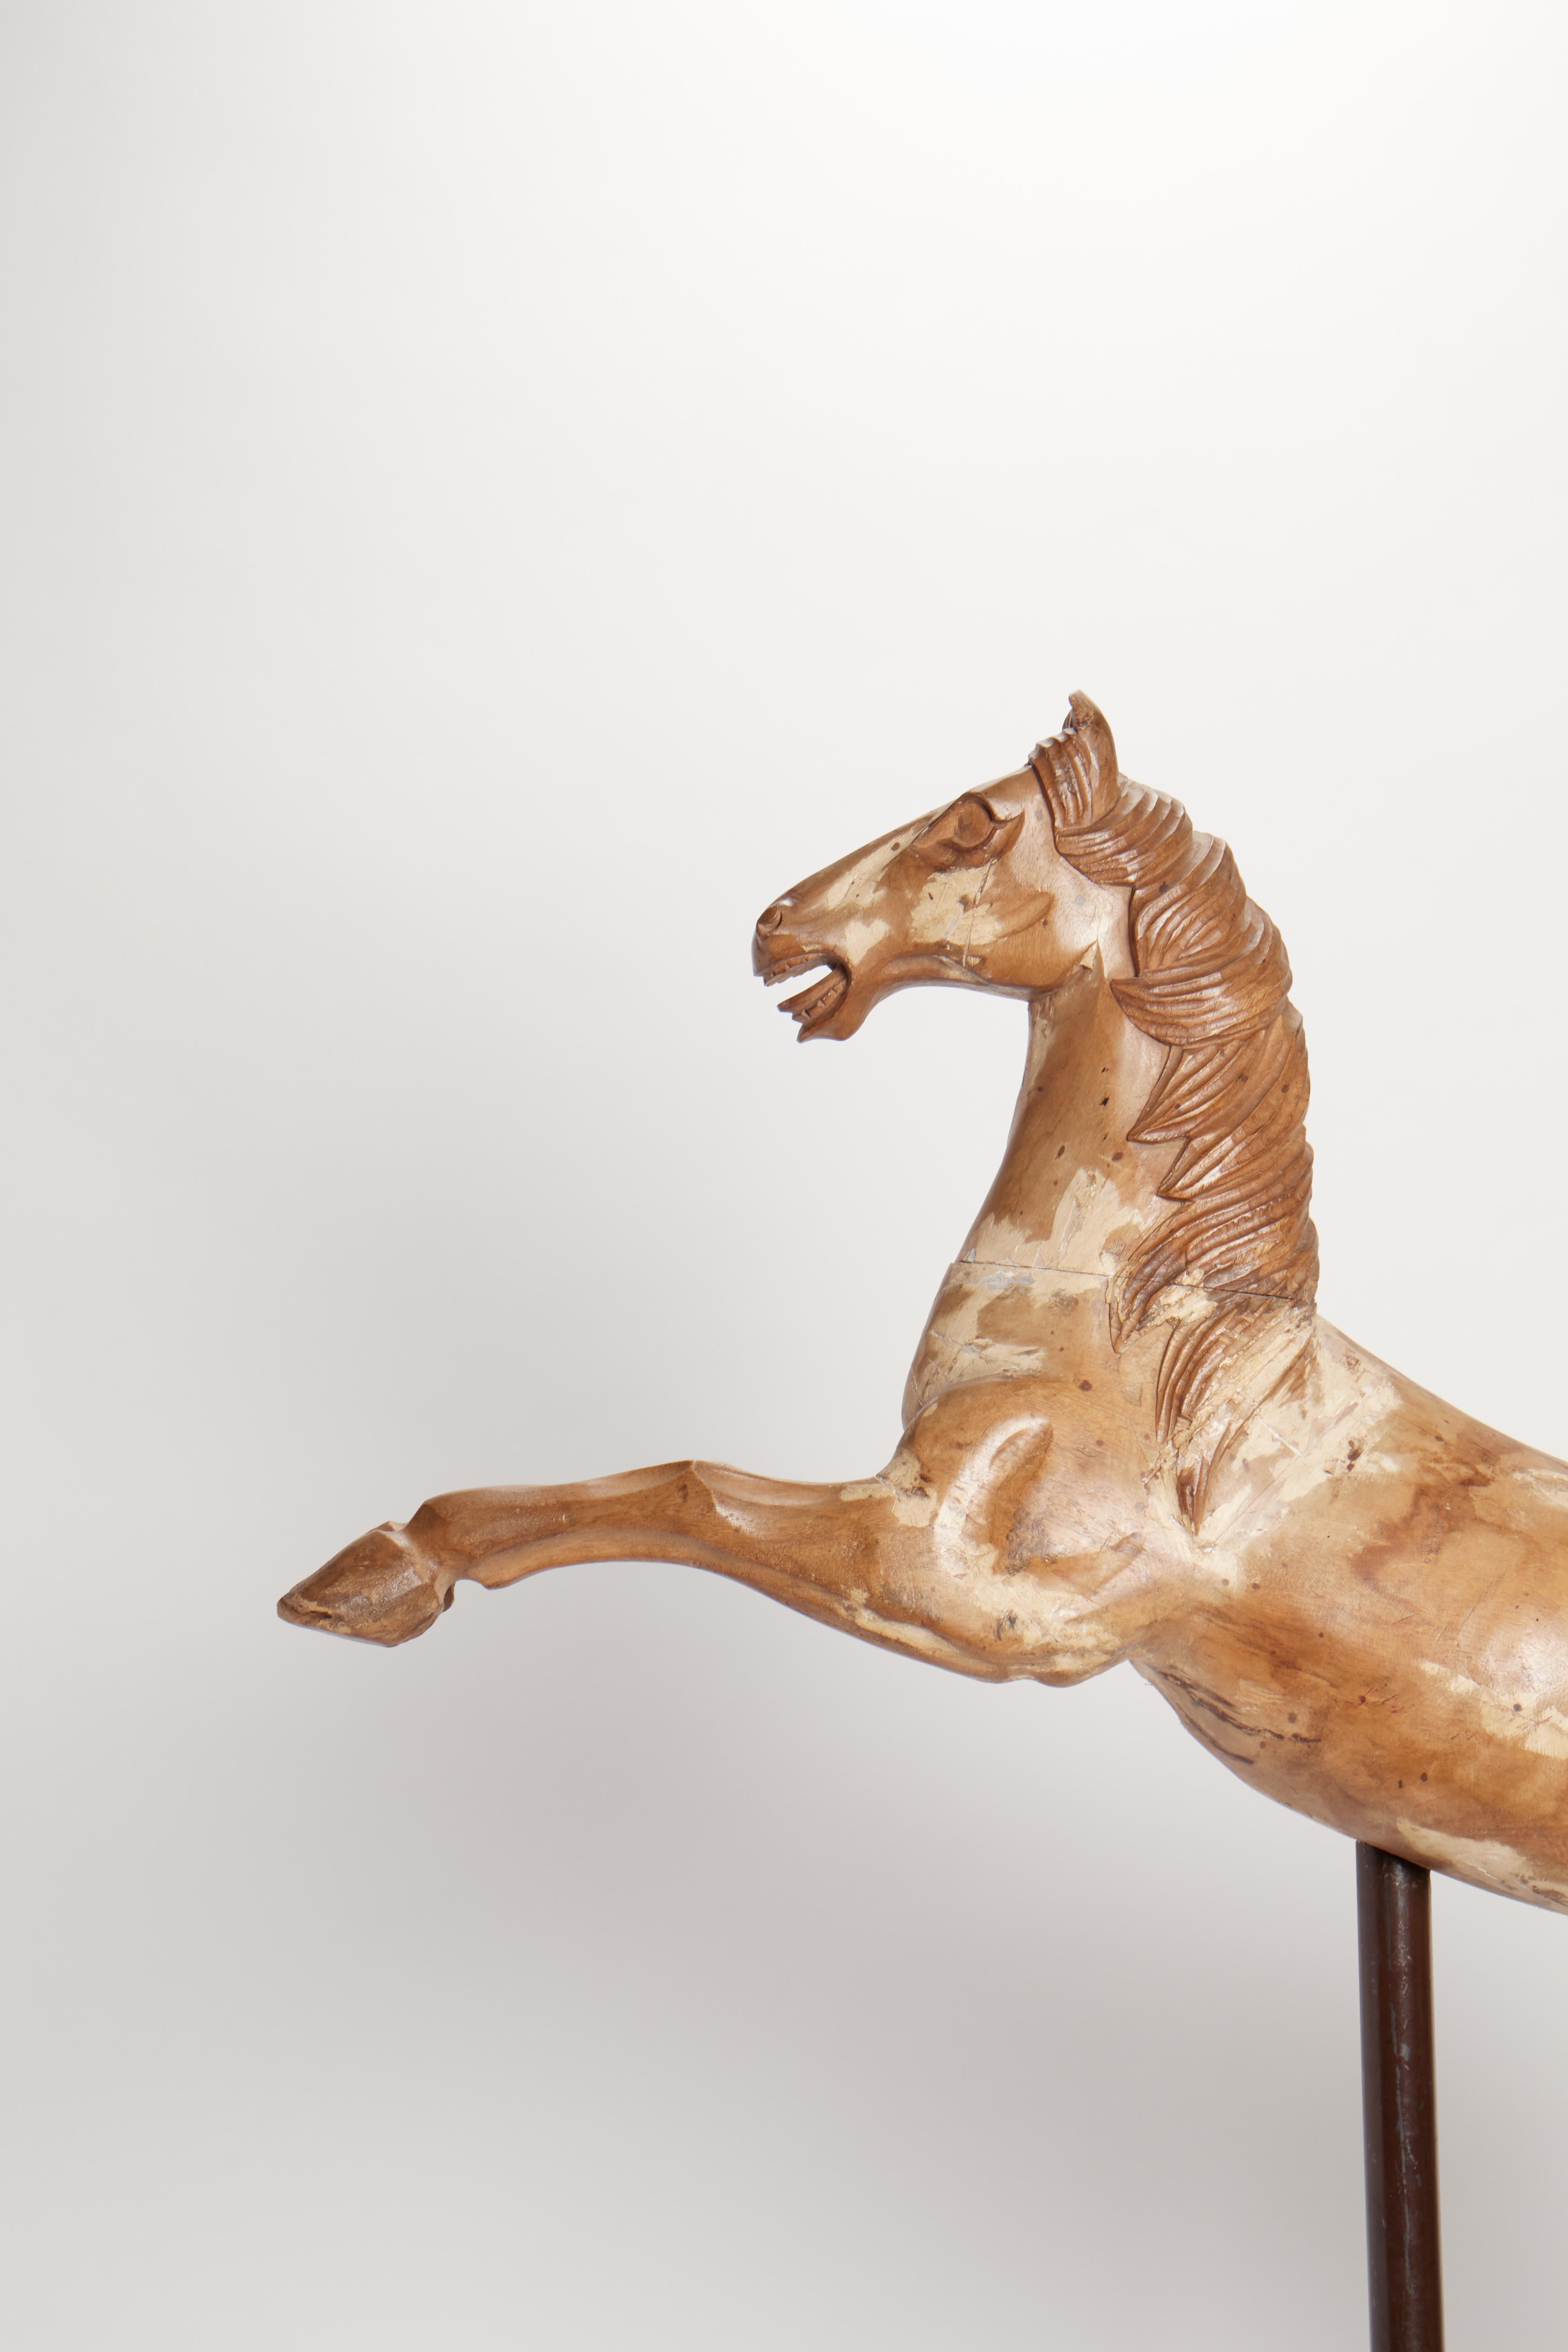 An old Italian wooden sculpture of a rampant carrousel horse. Modern metal base. Measure refers to the horse only. Italy, 1750 ca.